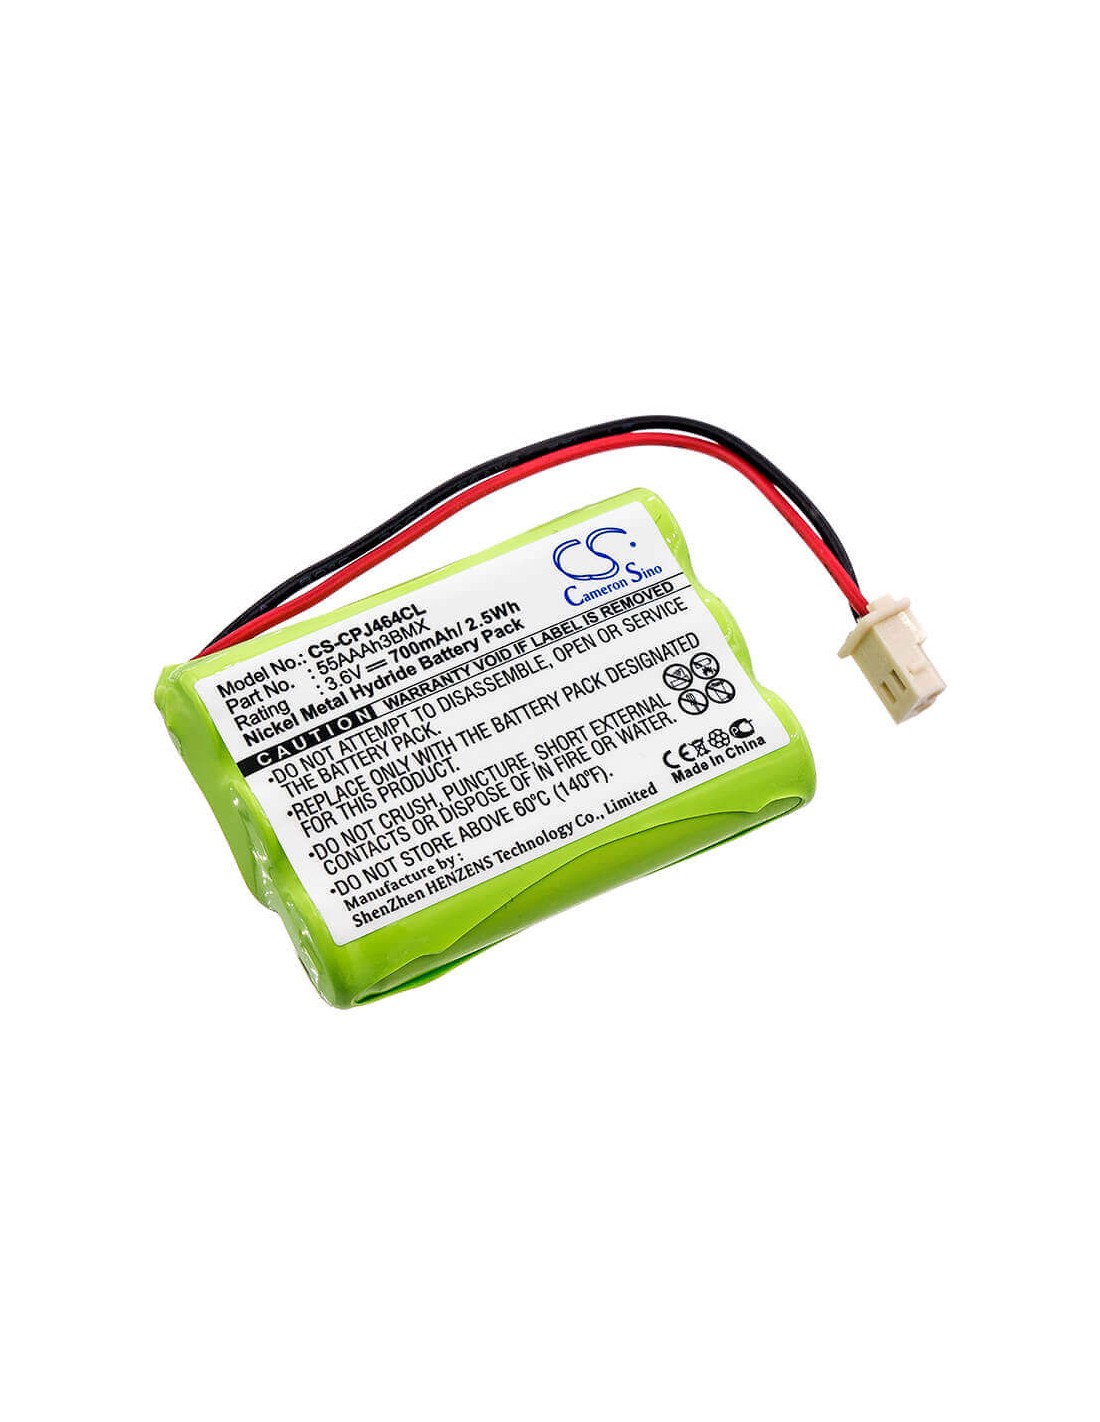 Battery for IQ-NIMH-001 Optex iVision Wireless Two-Way Intercom System 3.6V, 700mAh - 2.52Wh